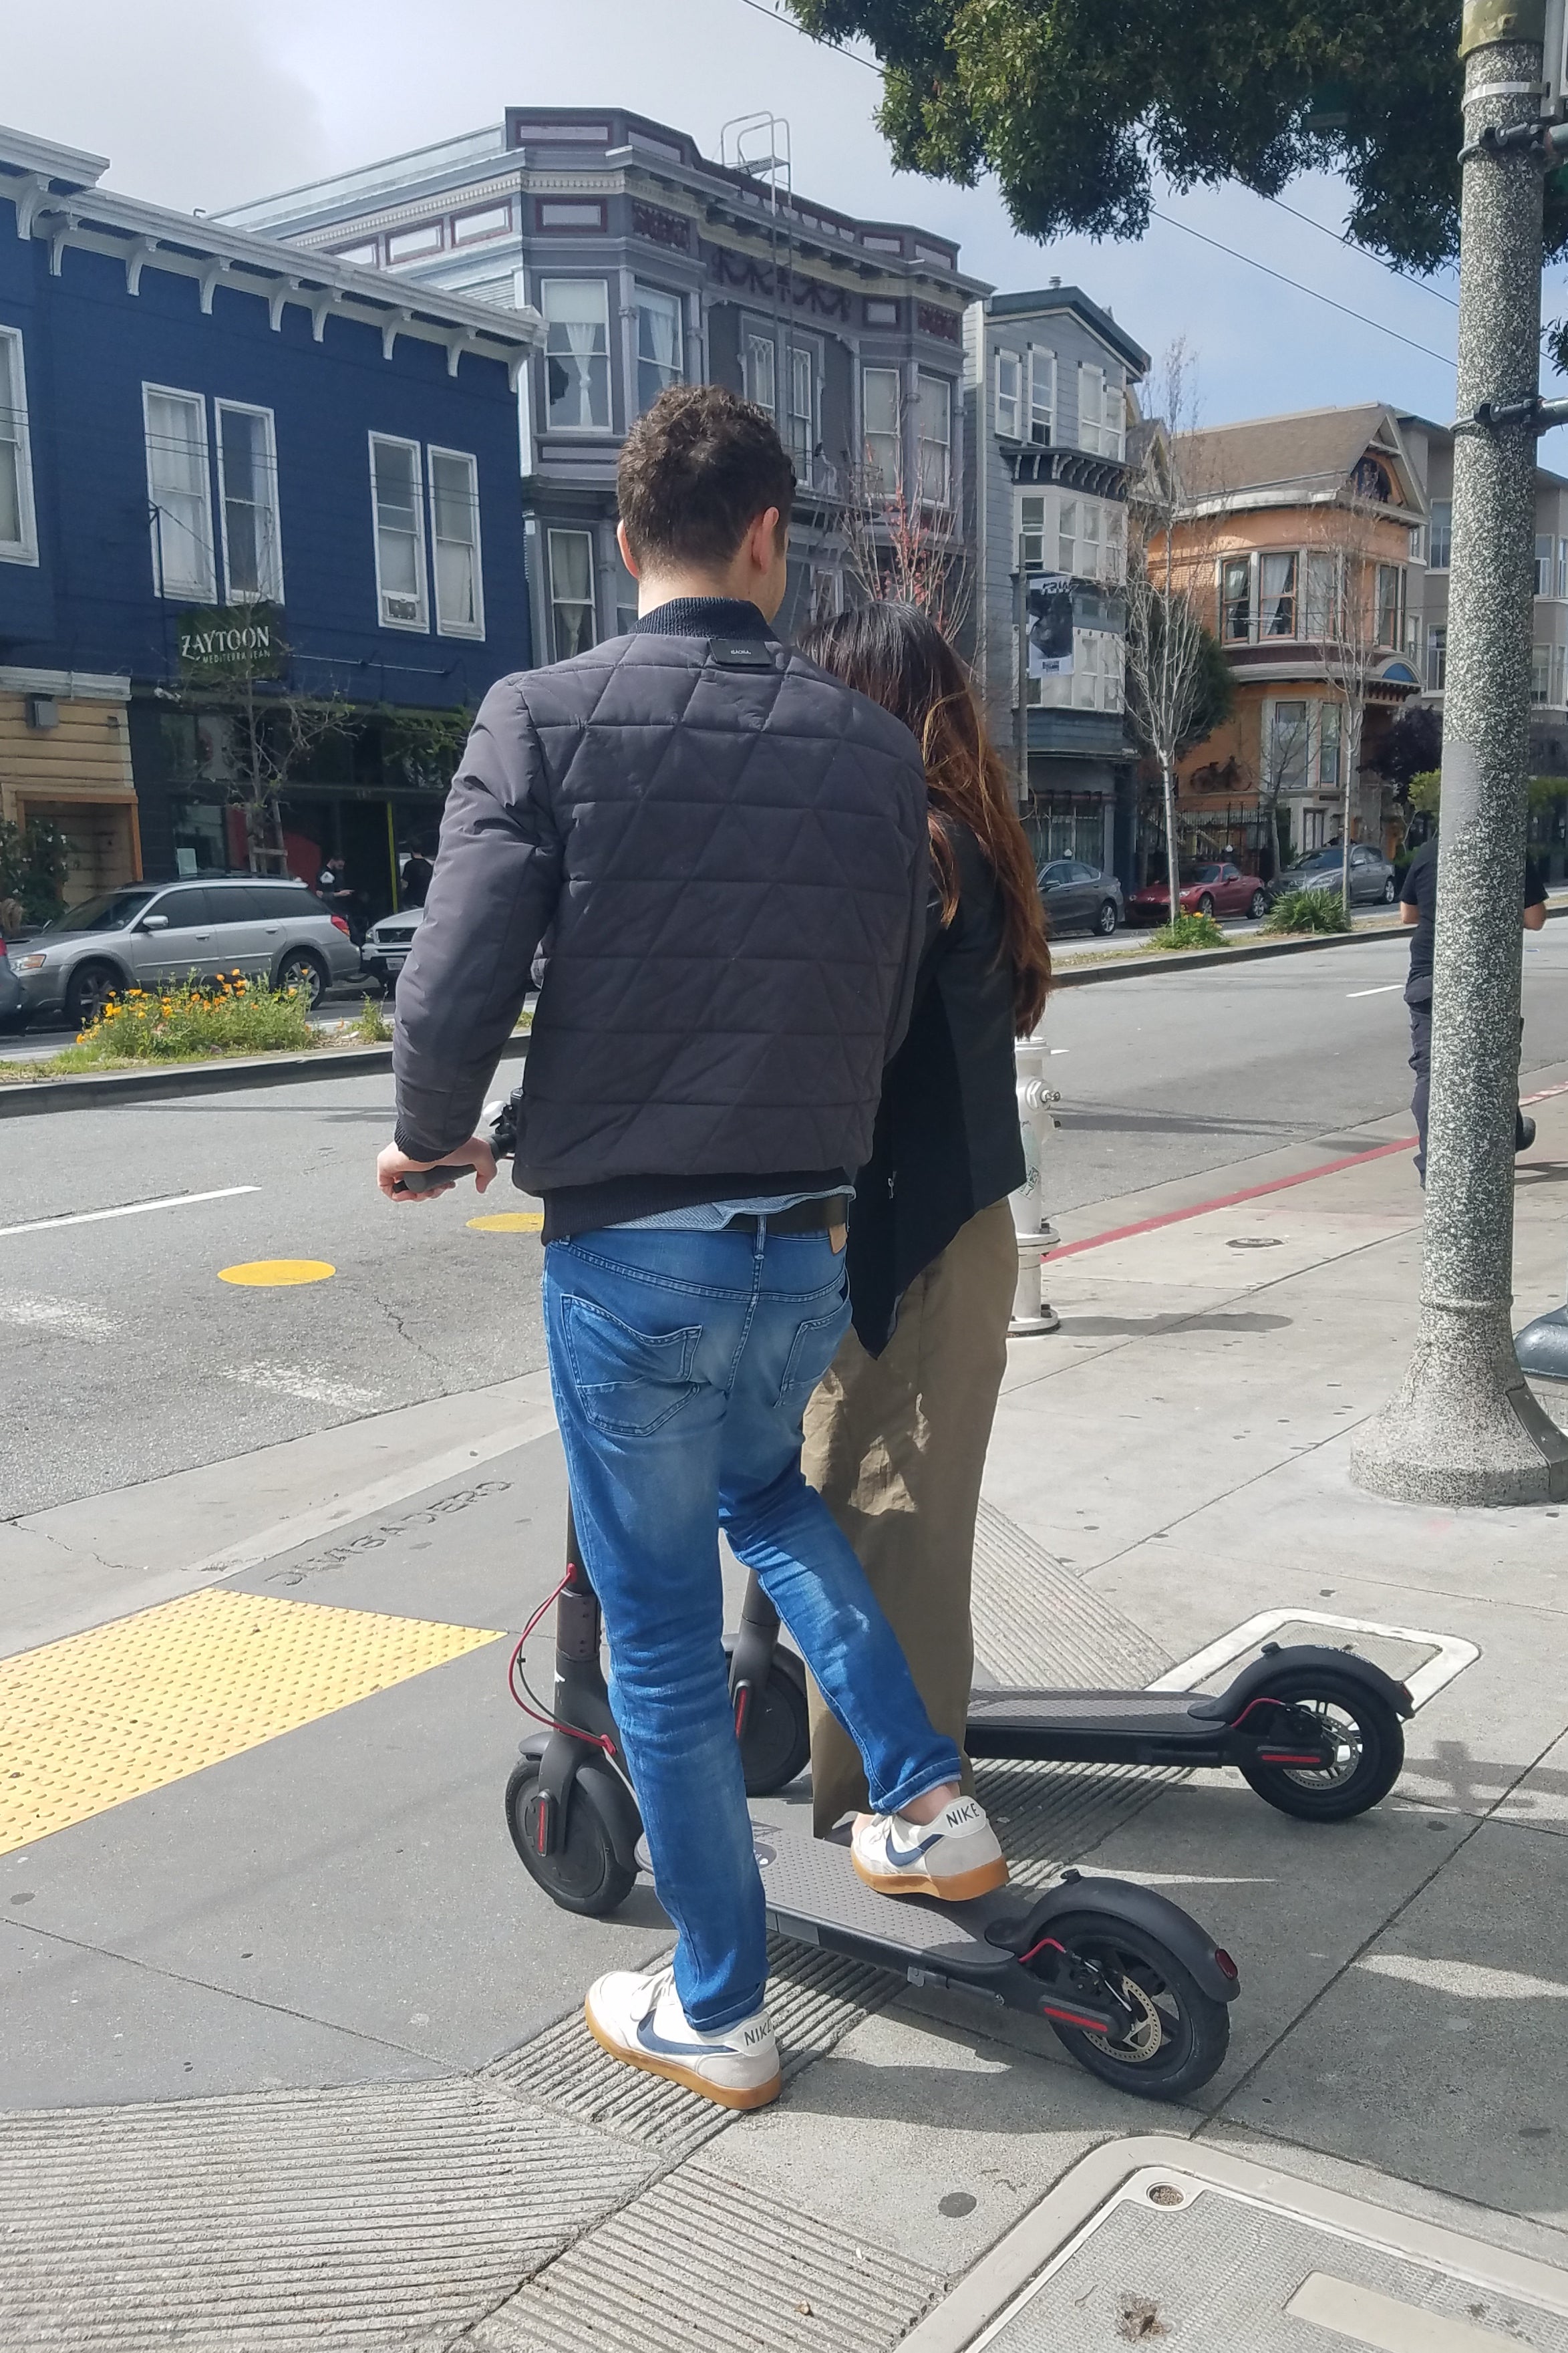 "We cannot overstate the public safety hazard that operating motorized scooters pose on City sidewalks."